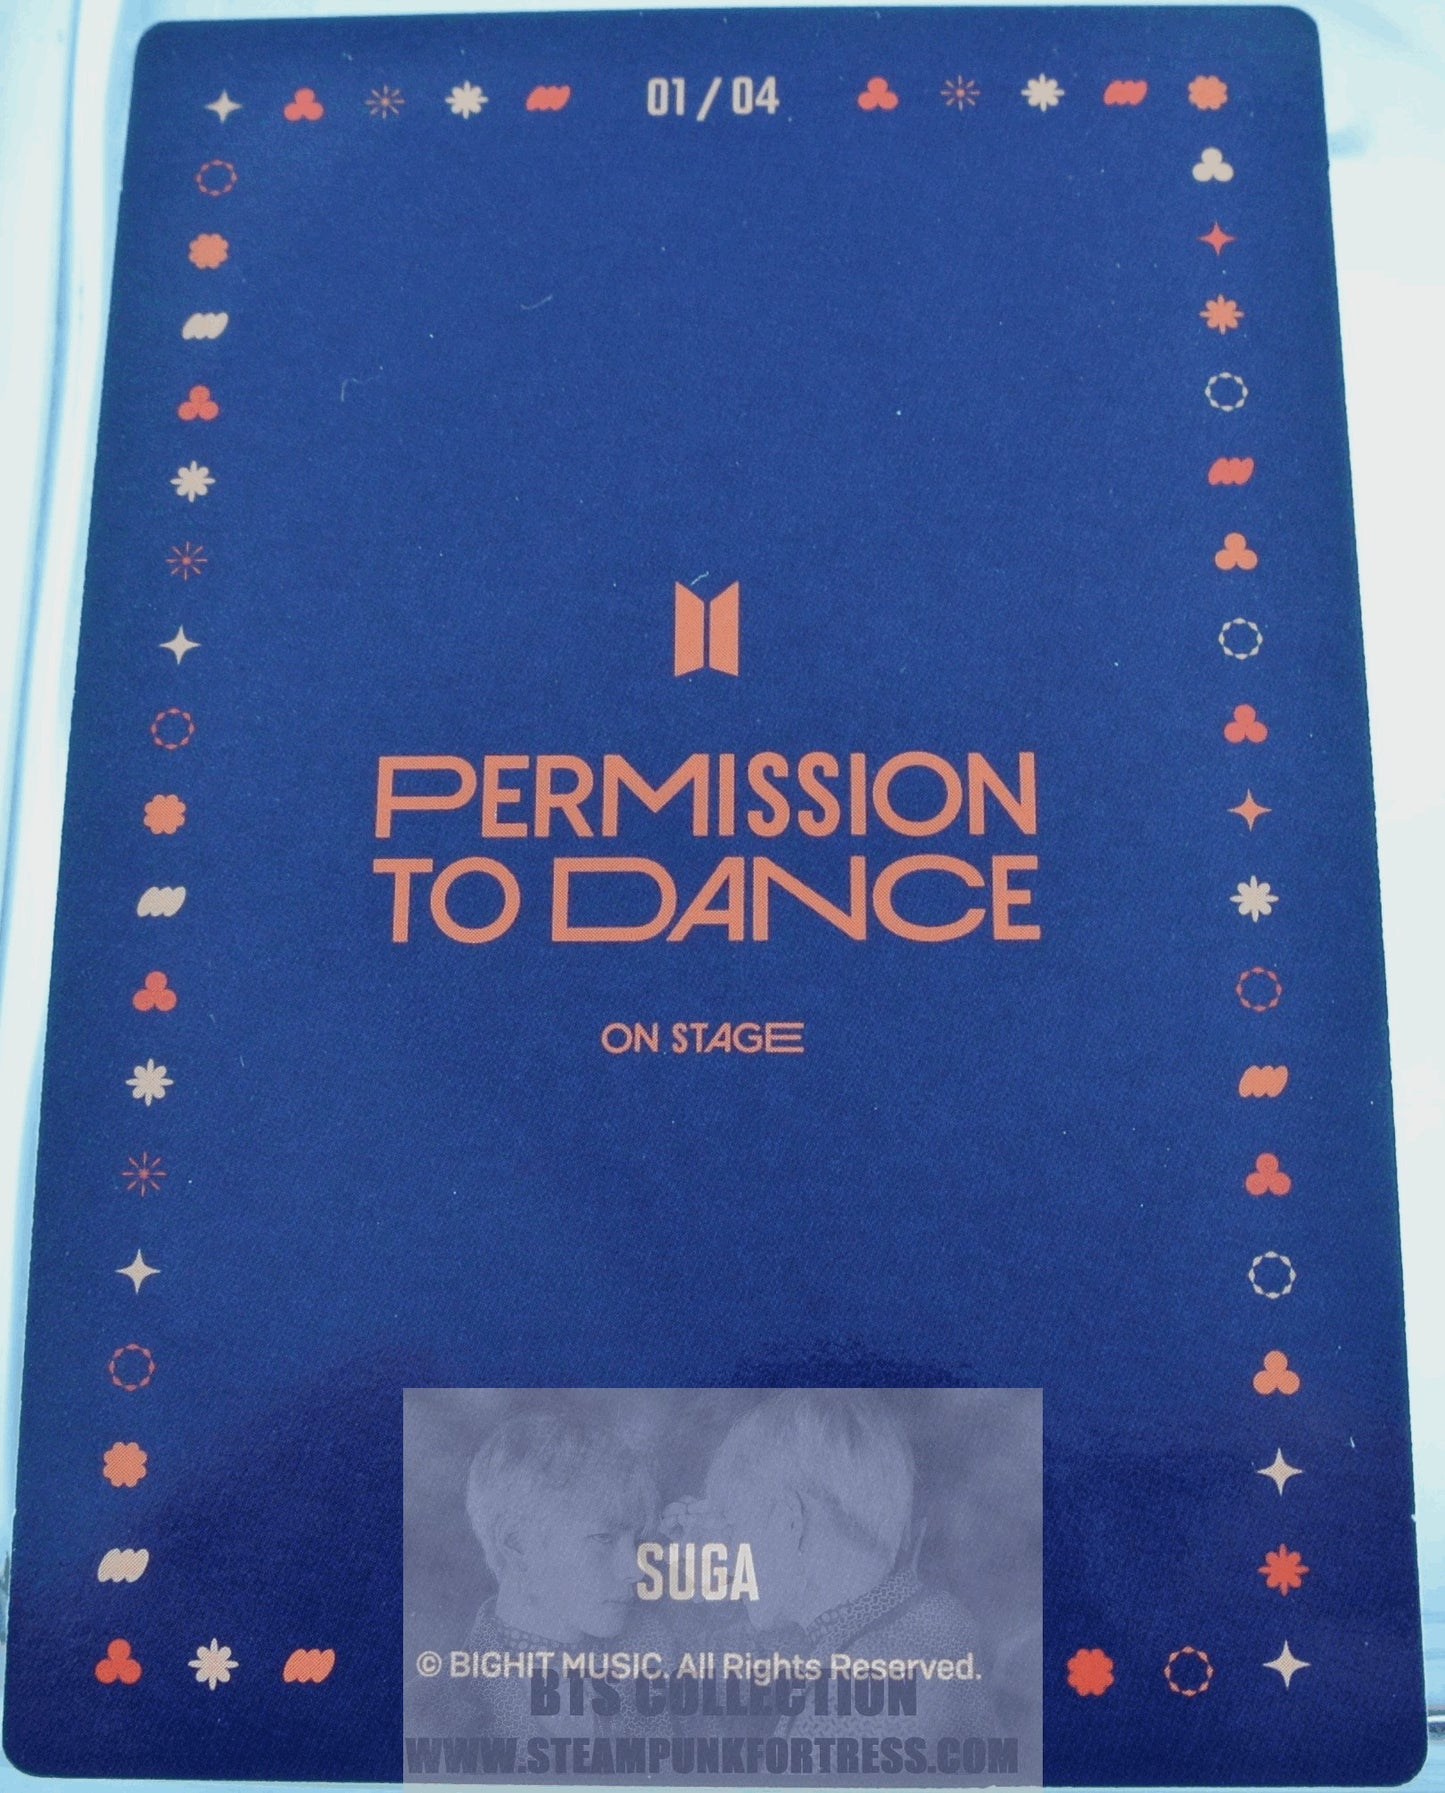 BTS SUGA MIN YOONGI YOON-GI PTD 2022 PERMISSION TO DANCE ON STAGE SEOUL #1 OF 4 PHOTOCARD PHOTO CARD NEW OFFICIAL MERCHANDISE